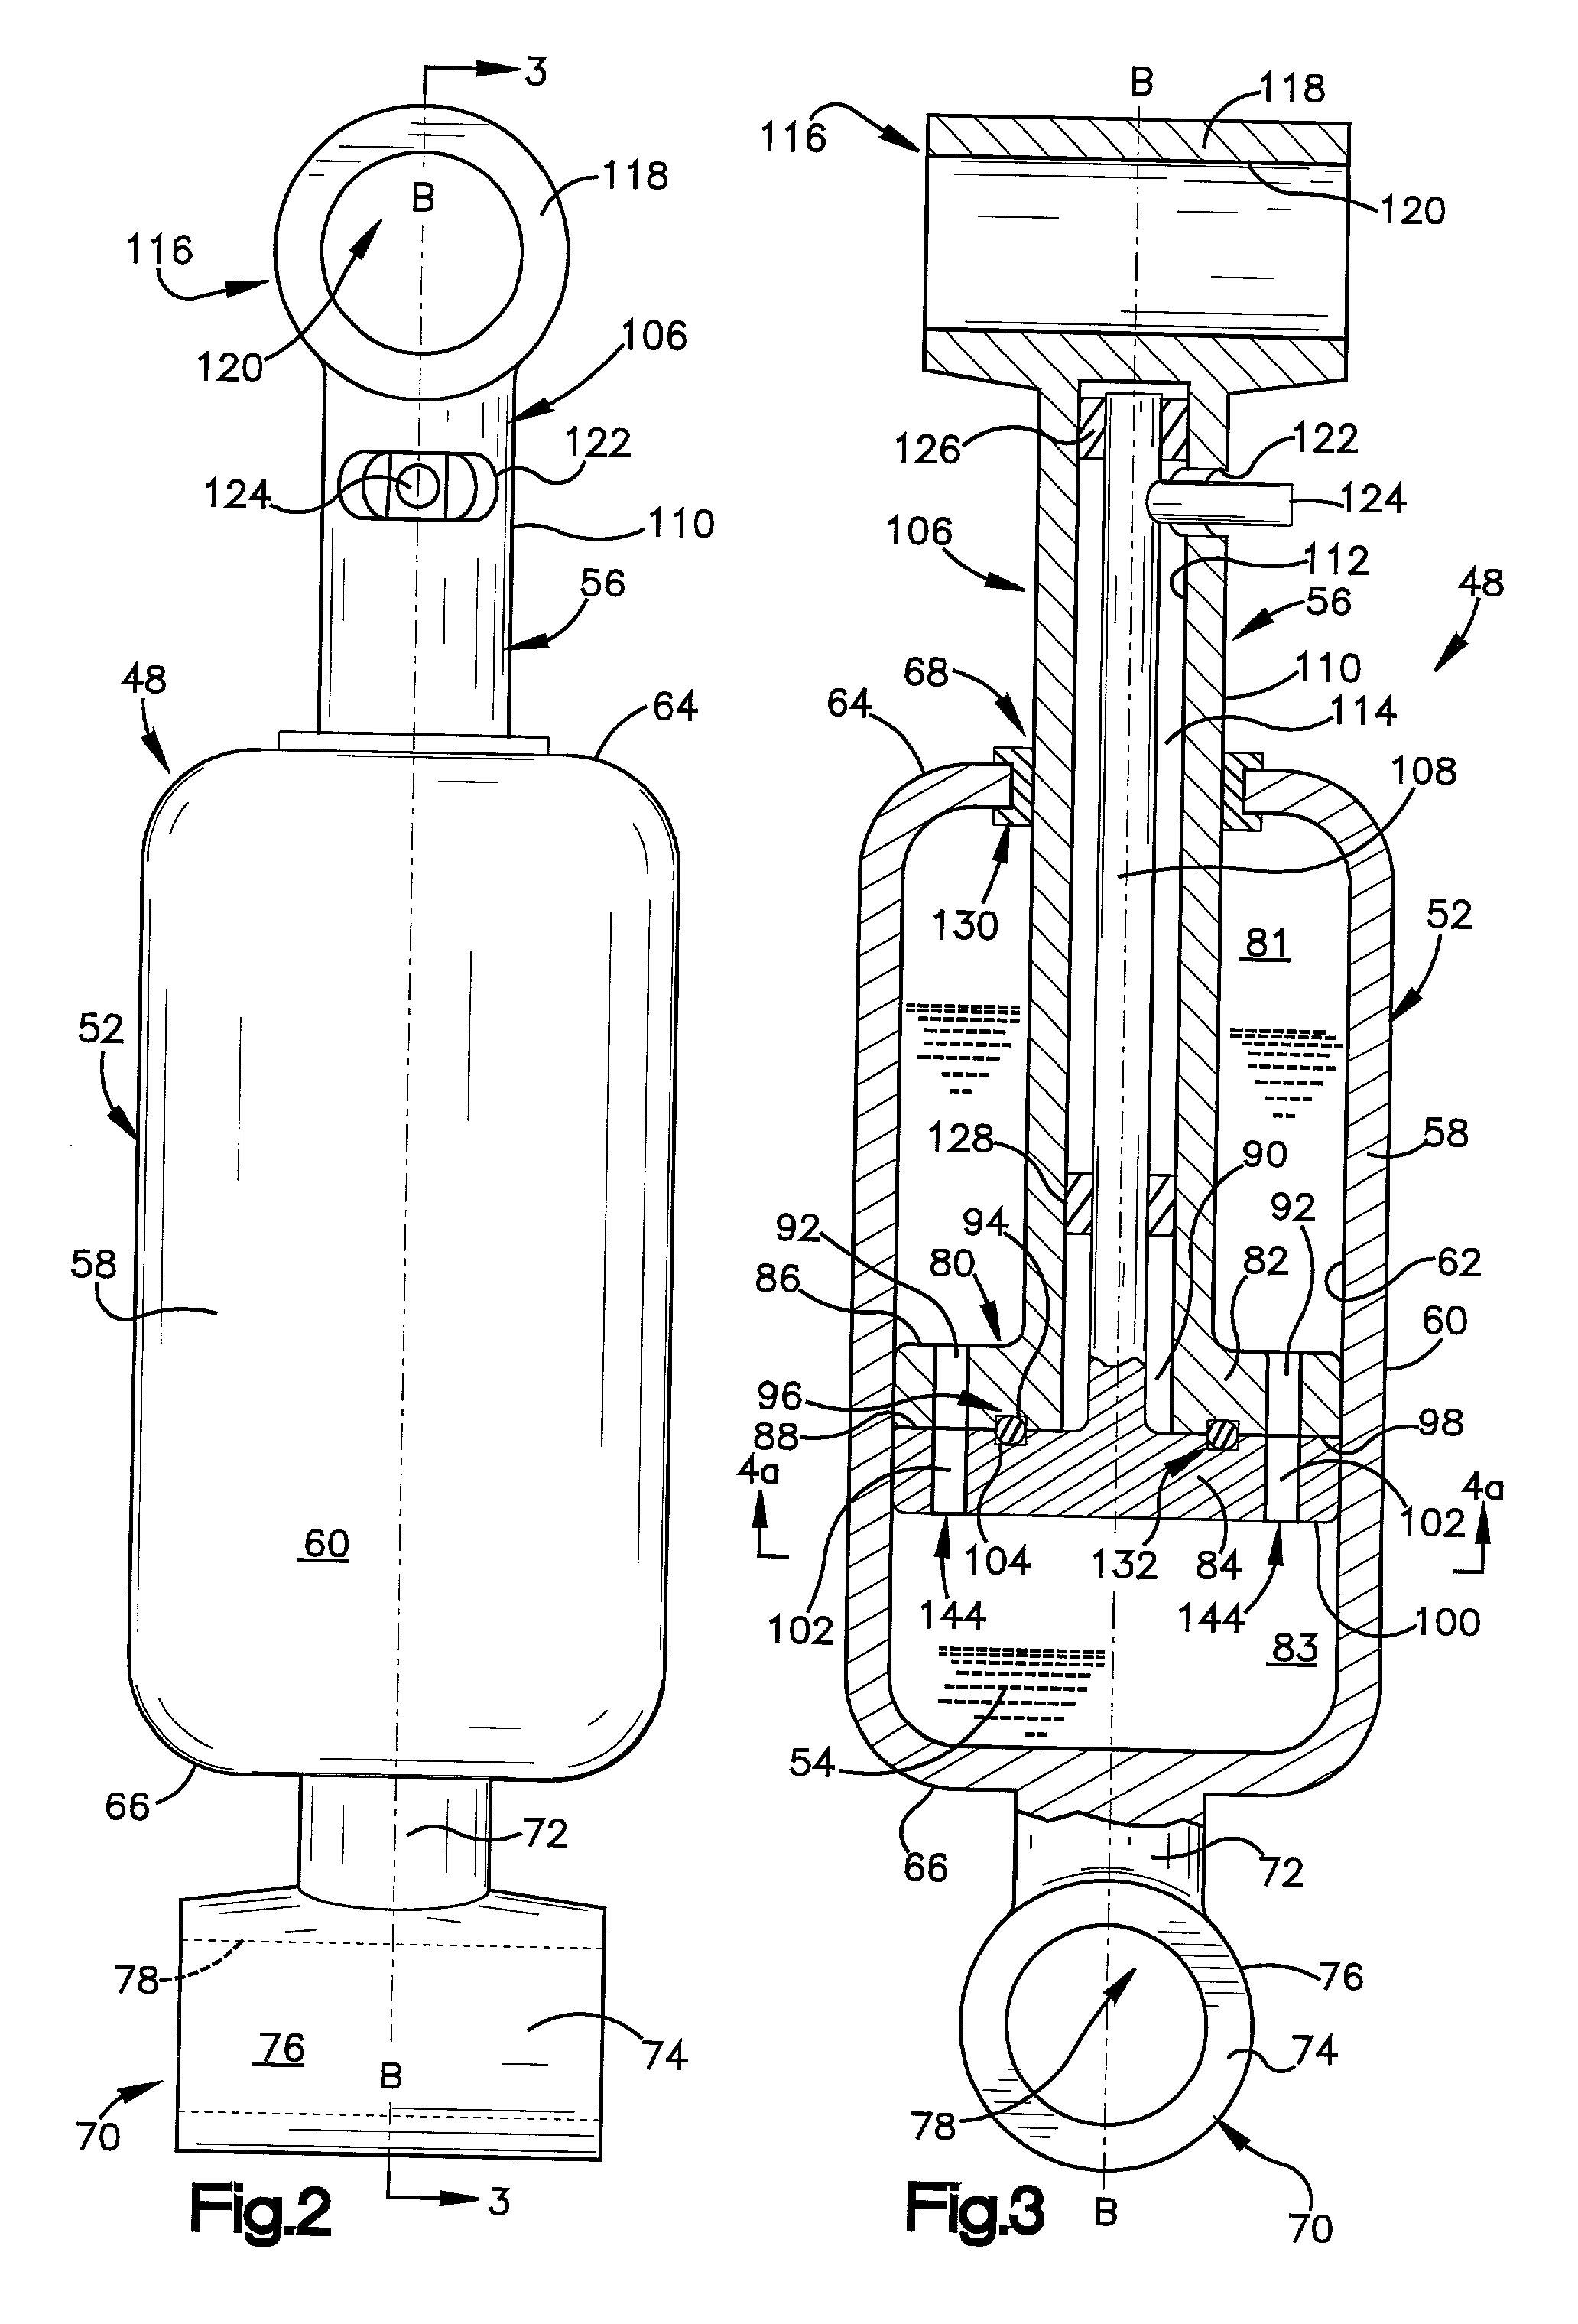 Anti-roll bar with link actuator for controlling torsional rigitidy